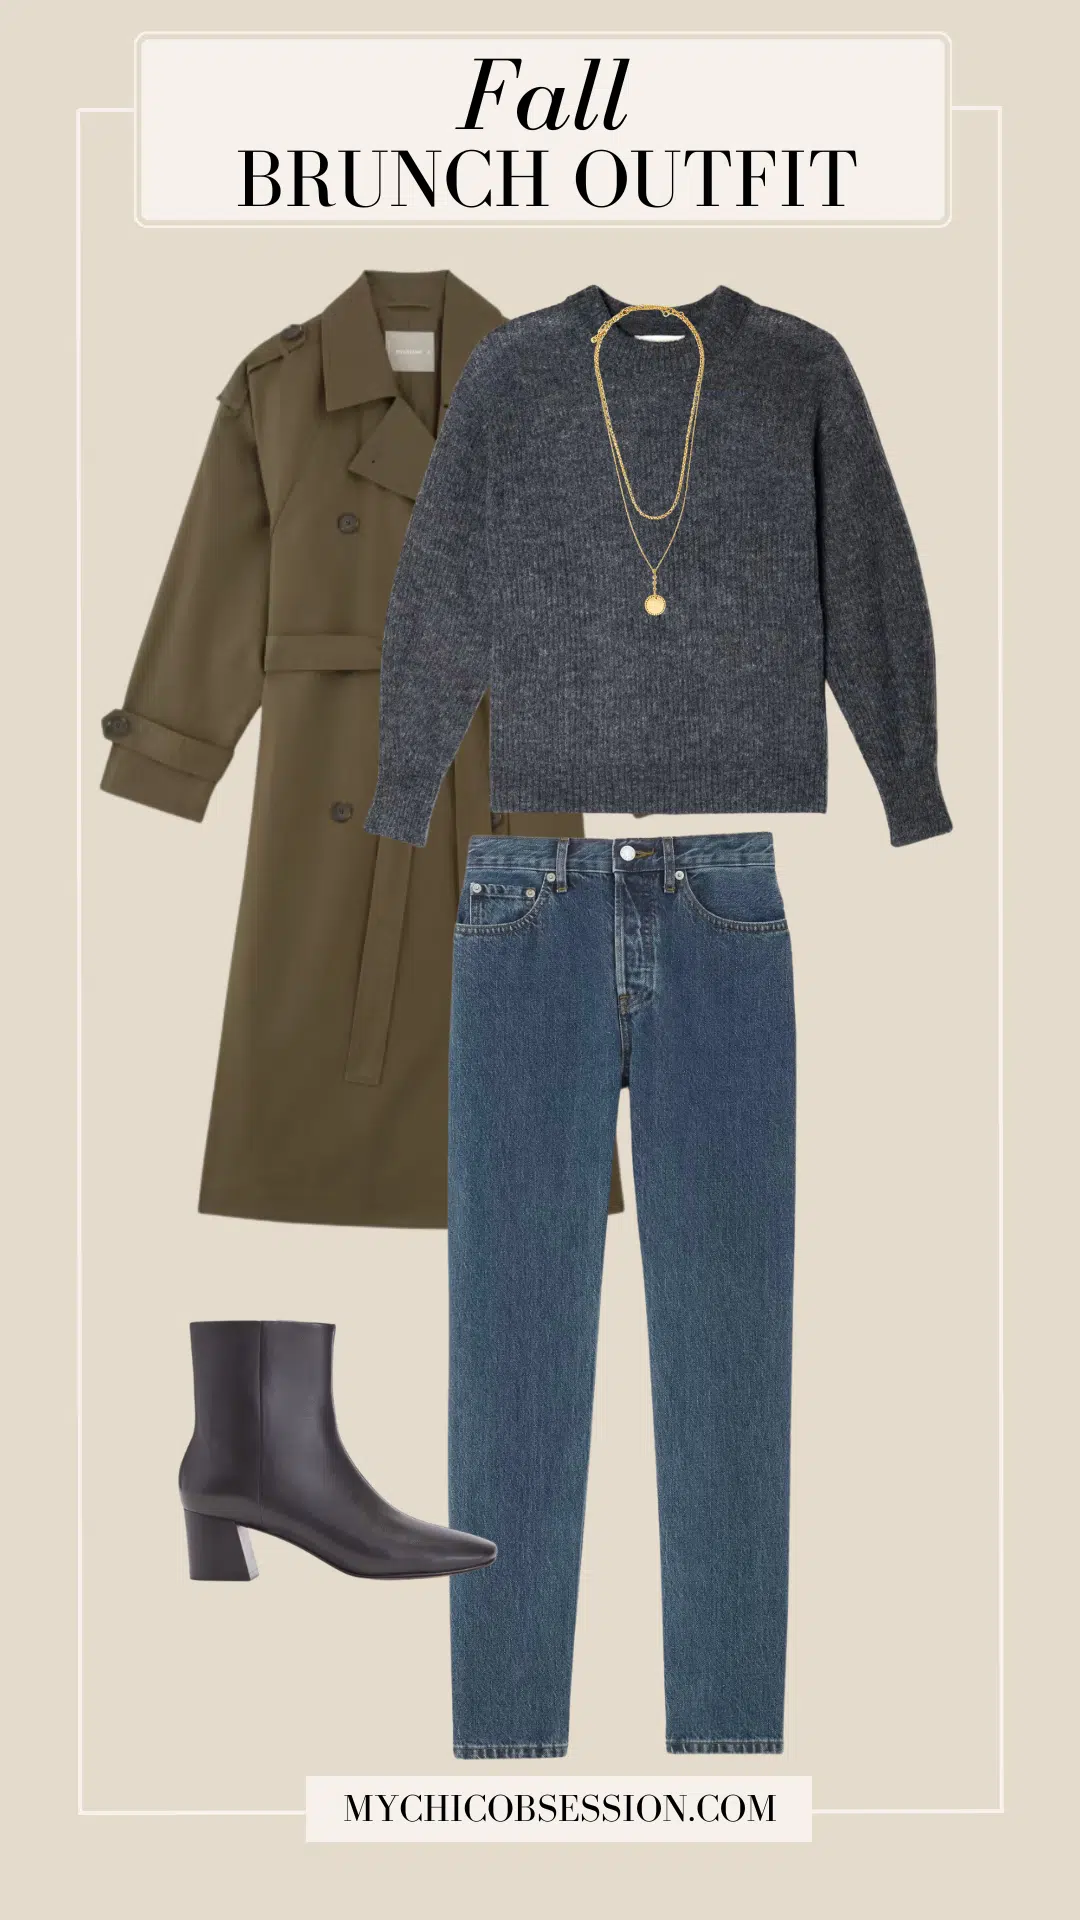 trench coat fall brunch outfit